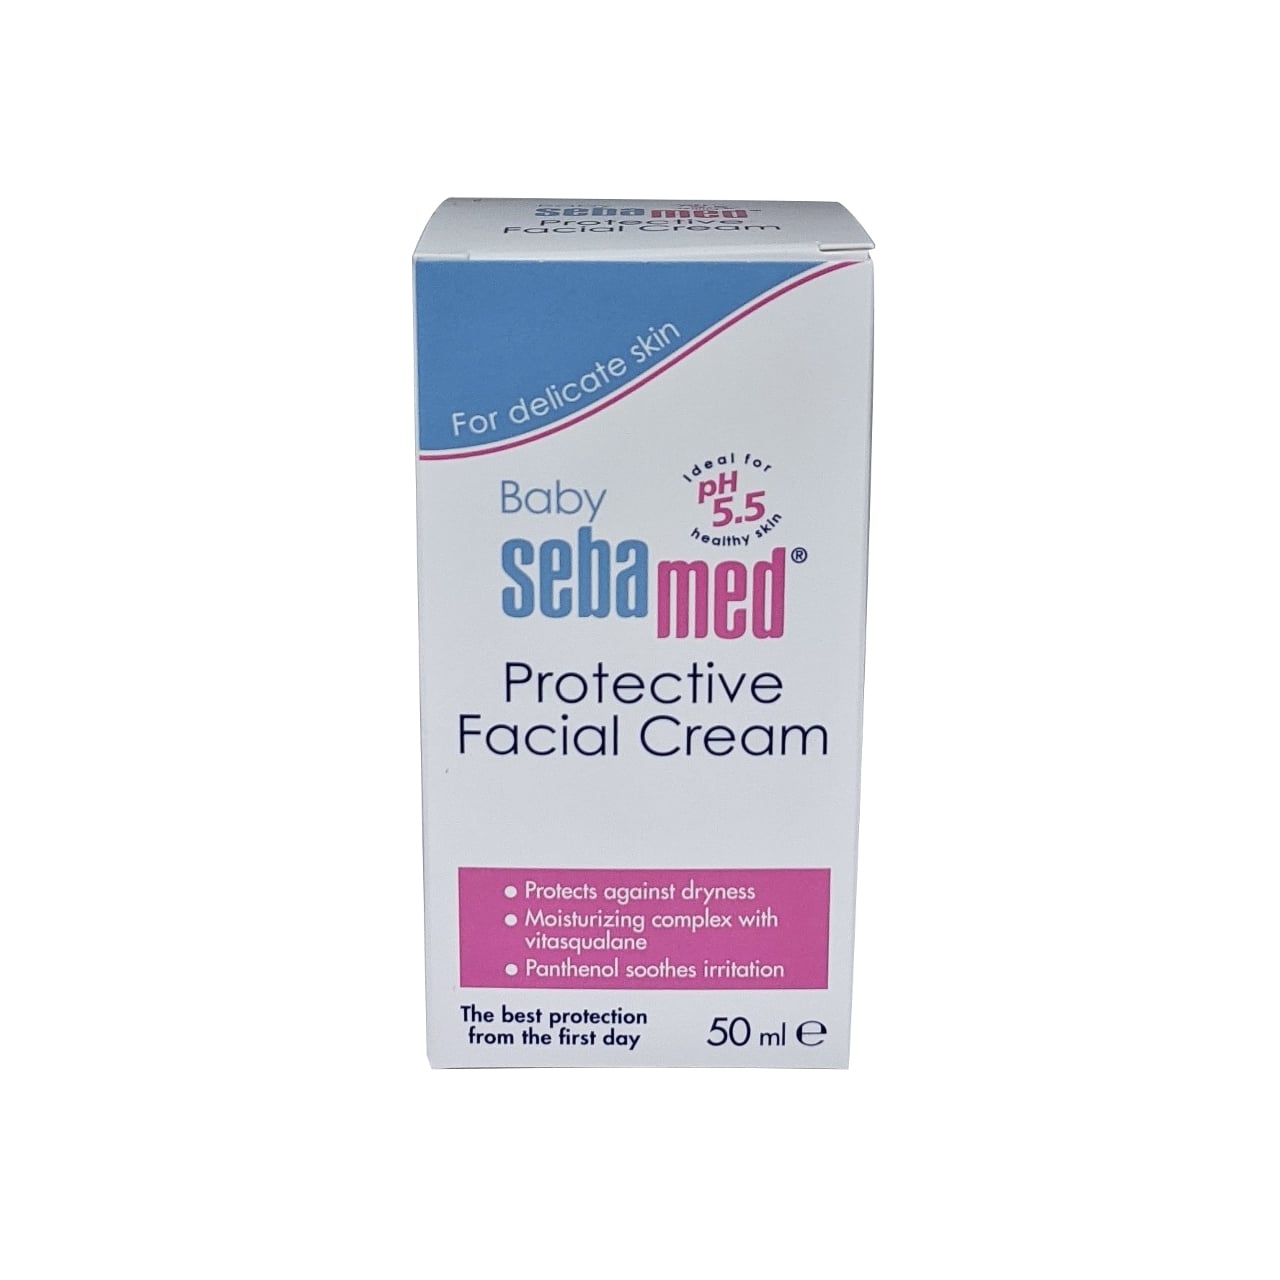 Product label for Baby Sebamed Protective Facial Cream in English